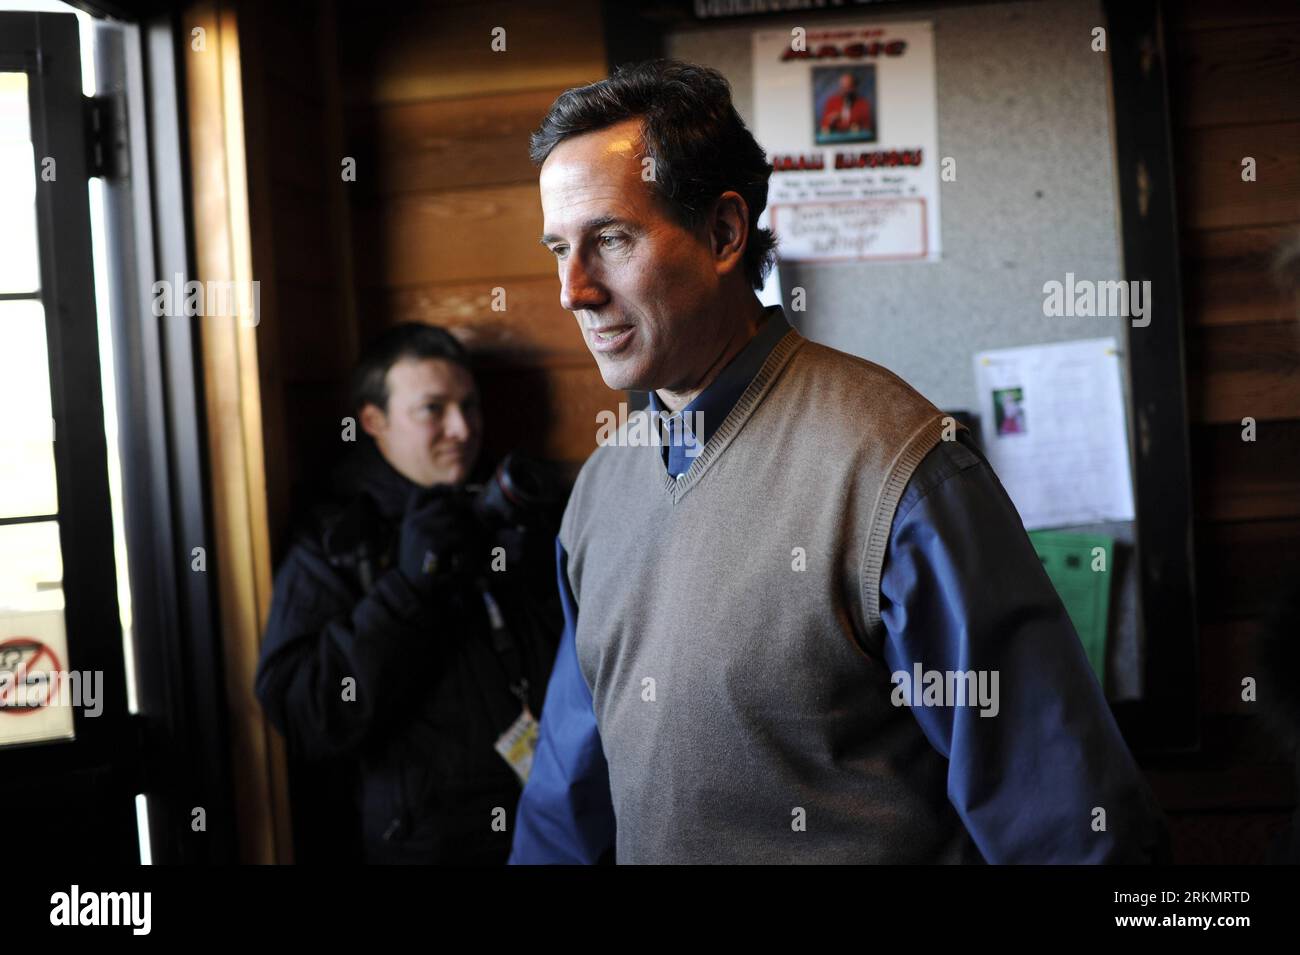 Bildnummer: 56802820  Datum: 02.01.2012  Copyright: imago/Xinhua (120103) -- DES MOINES, Jan. 3, 2012 (Xinhua) -- U.S. Republican presidential candidate Rick Santorum leaves after a campaign event at the Pizza Ranch restaurant in Boone, Iowa, Jan. 2, 2012. As the first contest for the U.S. Republican Party to nominate its presidential candidate draws near, hopefuls of the Grand Old Party (GOP) are making their final dash towards the caucuses on Jan. 3 in Iowa. (Xinhua/Zhang Jun) (wn) U.S.-IOWA-GOP CAUCUS-RICK SANTORUM PUBLICATIONxNOTxINxCHN People Politik USA Wahl Wahlkampf Republikaner premiu Stock Photo